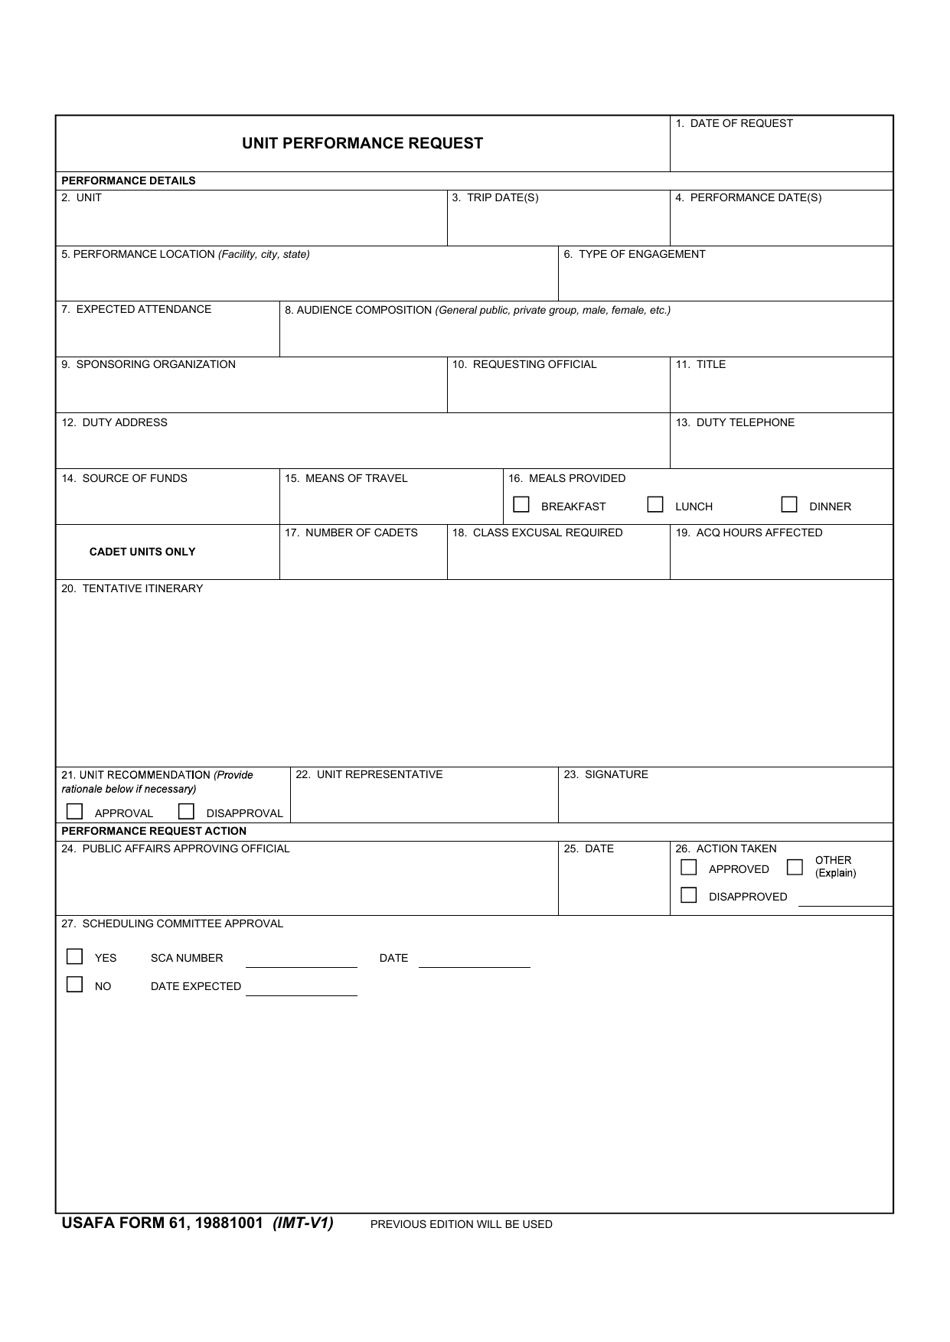 USAFA Form 61 Unit Performance Request, Page 1